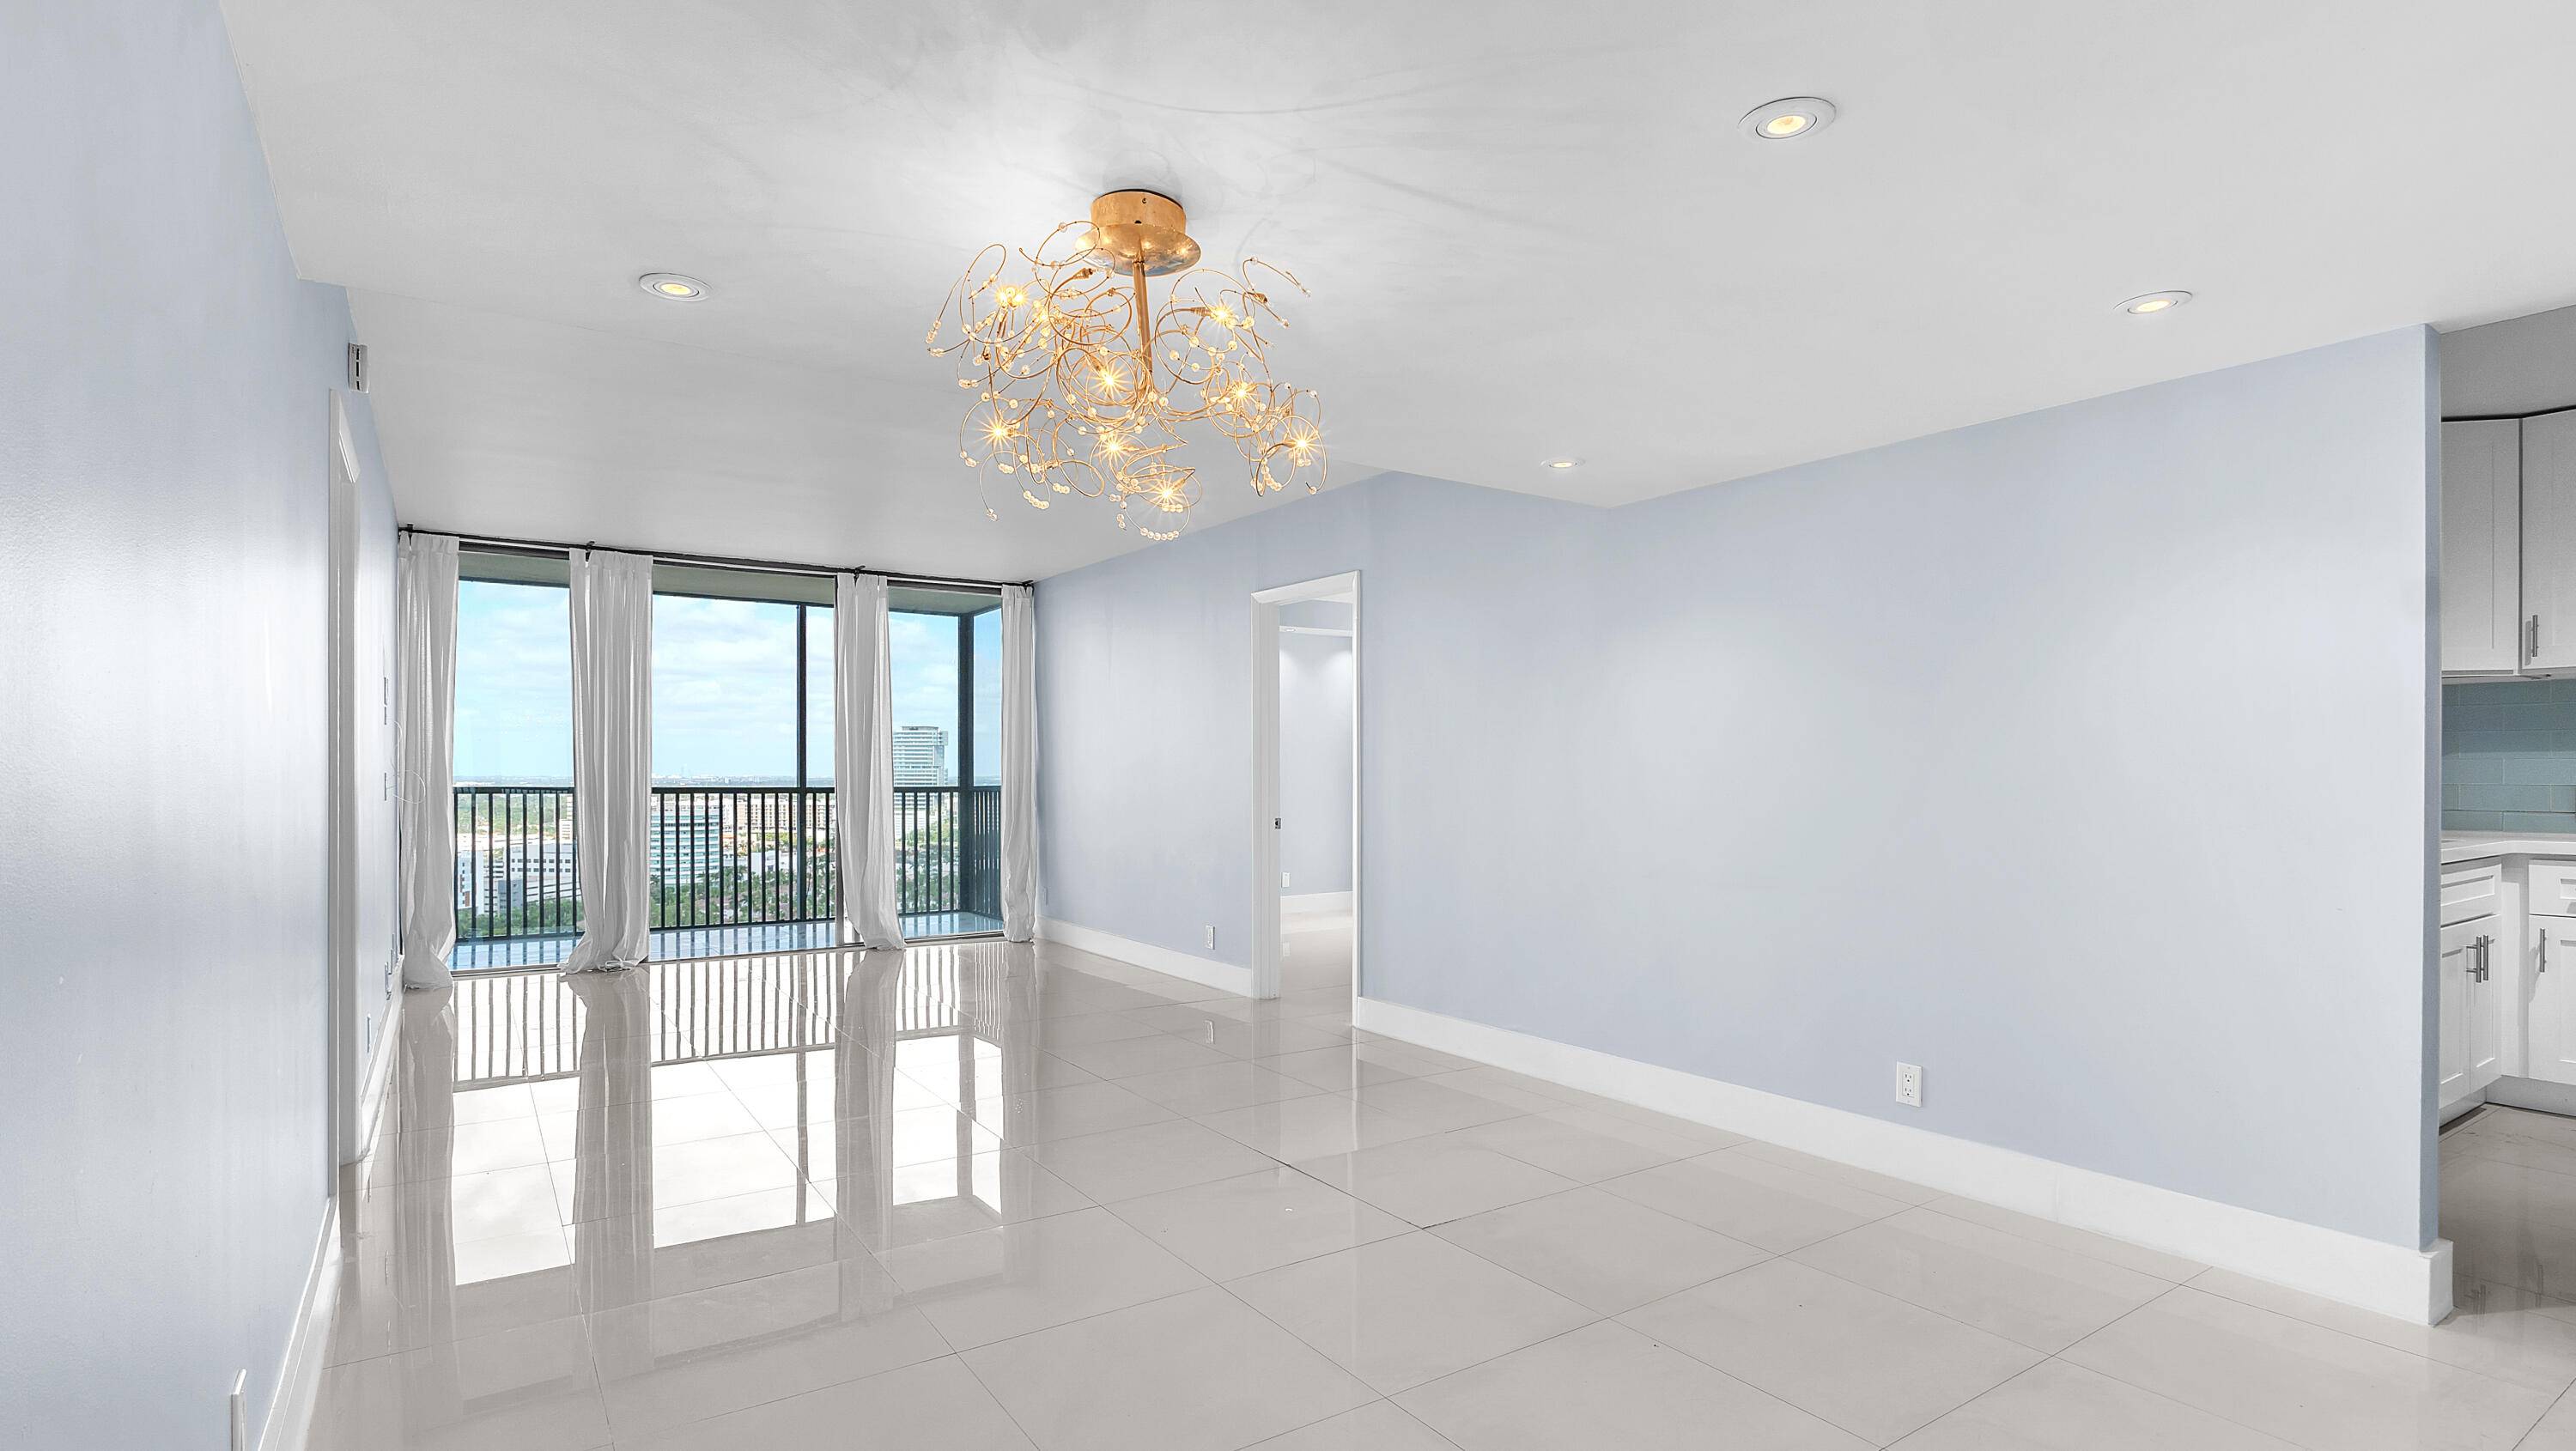 Welcome to Aventura ! Coronado Tower II is a gated all ages community in an exceptional location within walking distance to Aventura Mall and minutes from the beach, services, restaurants, ...